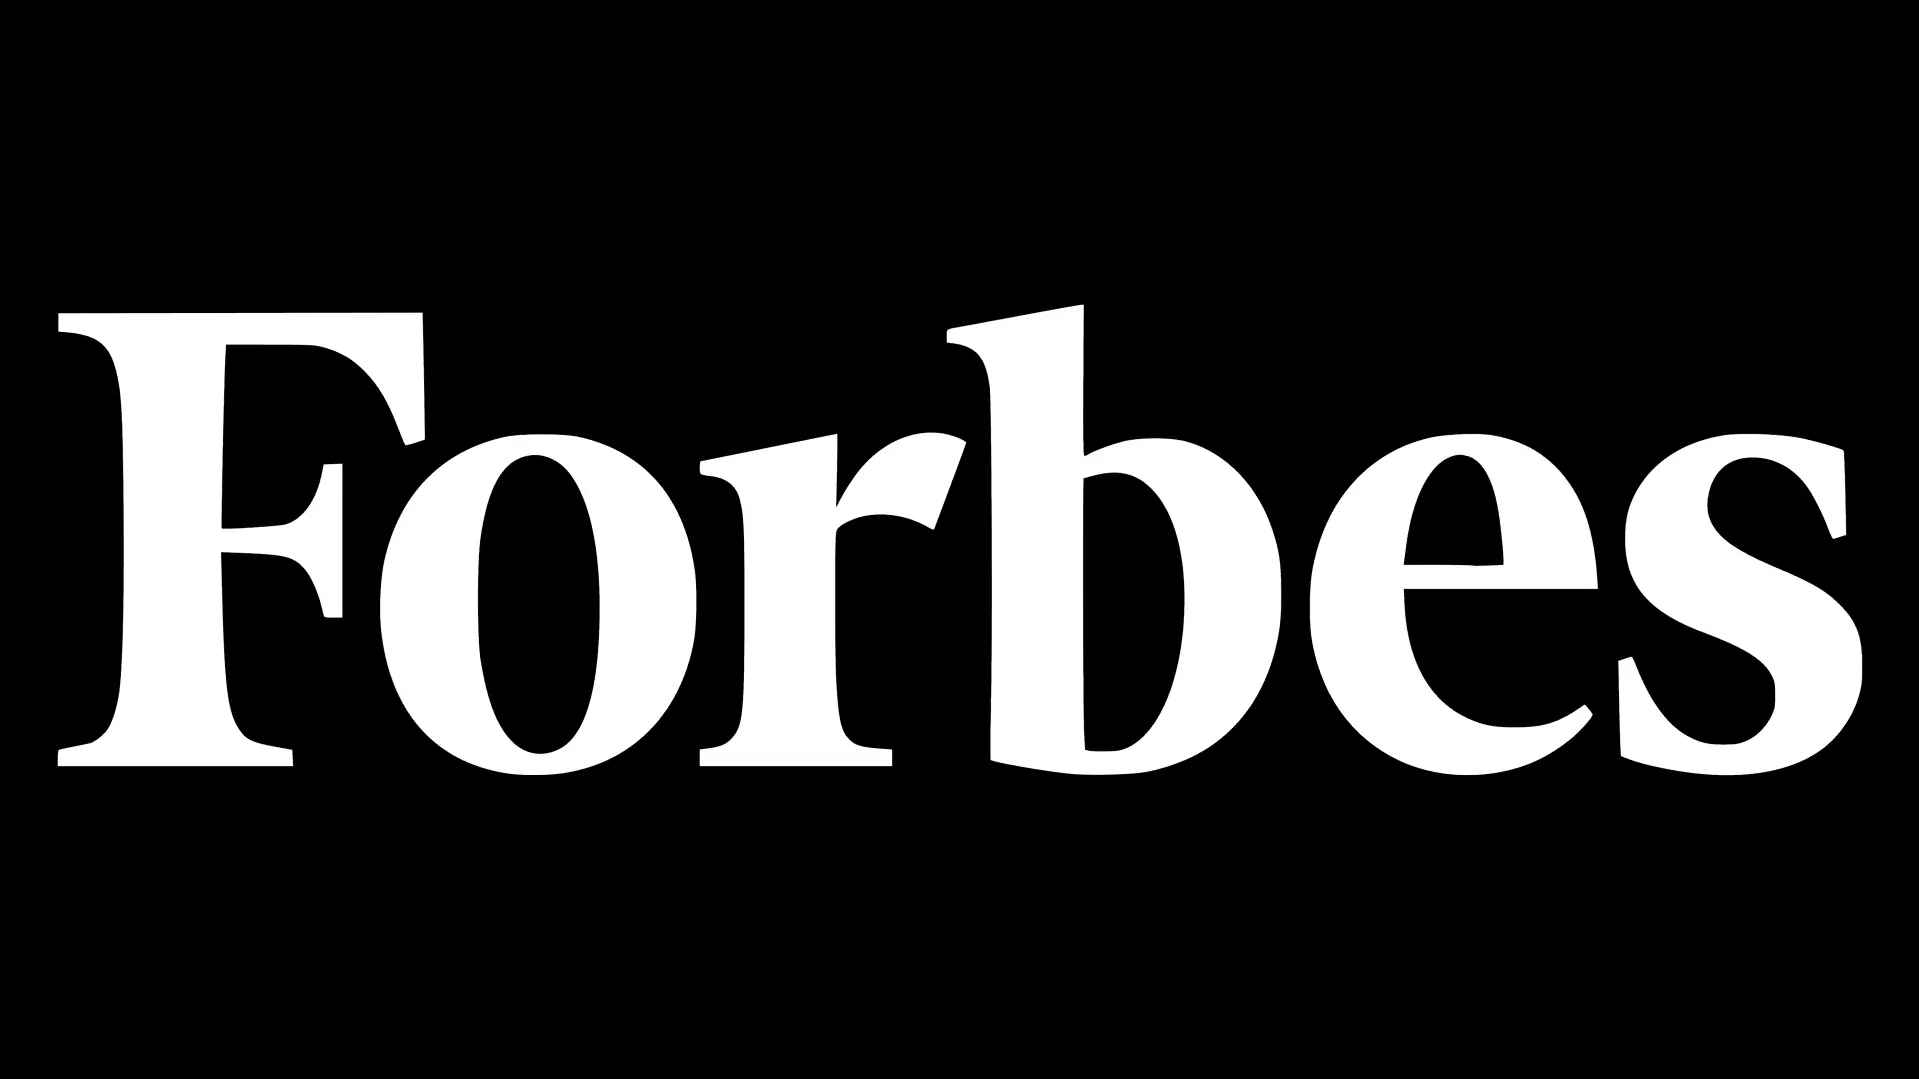 Forbes white text and black background logo.